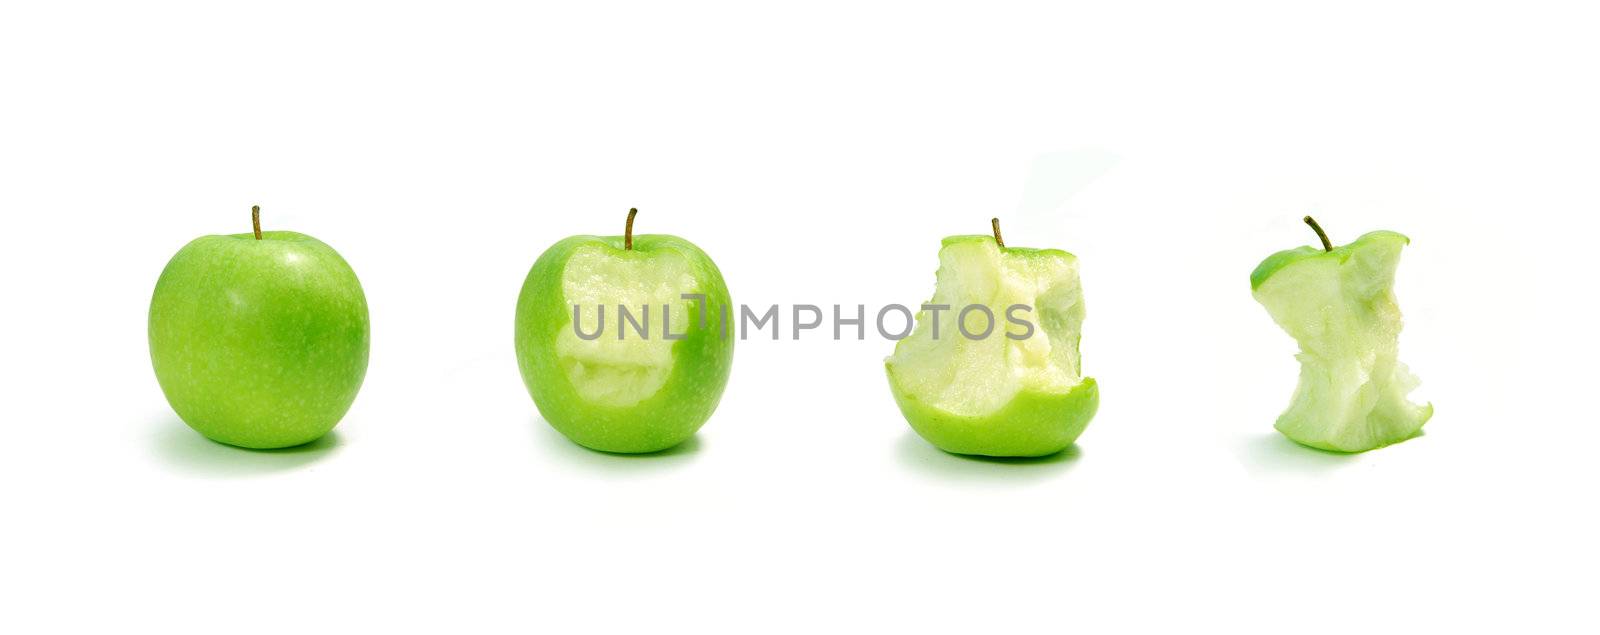 Conceptual image of various stages of an eaten apple